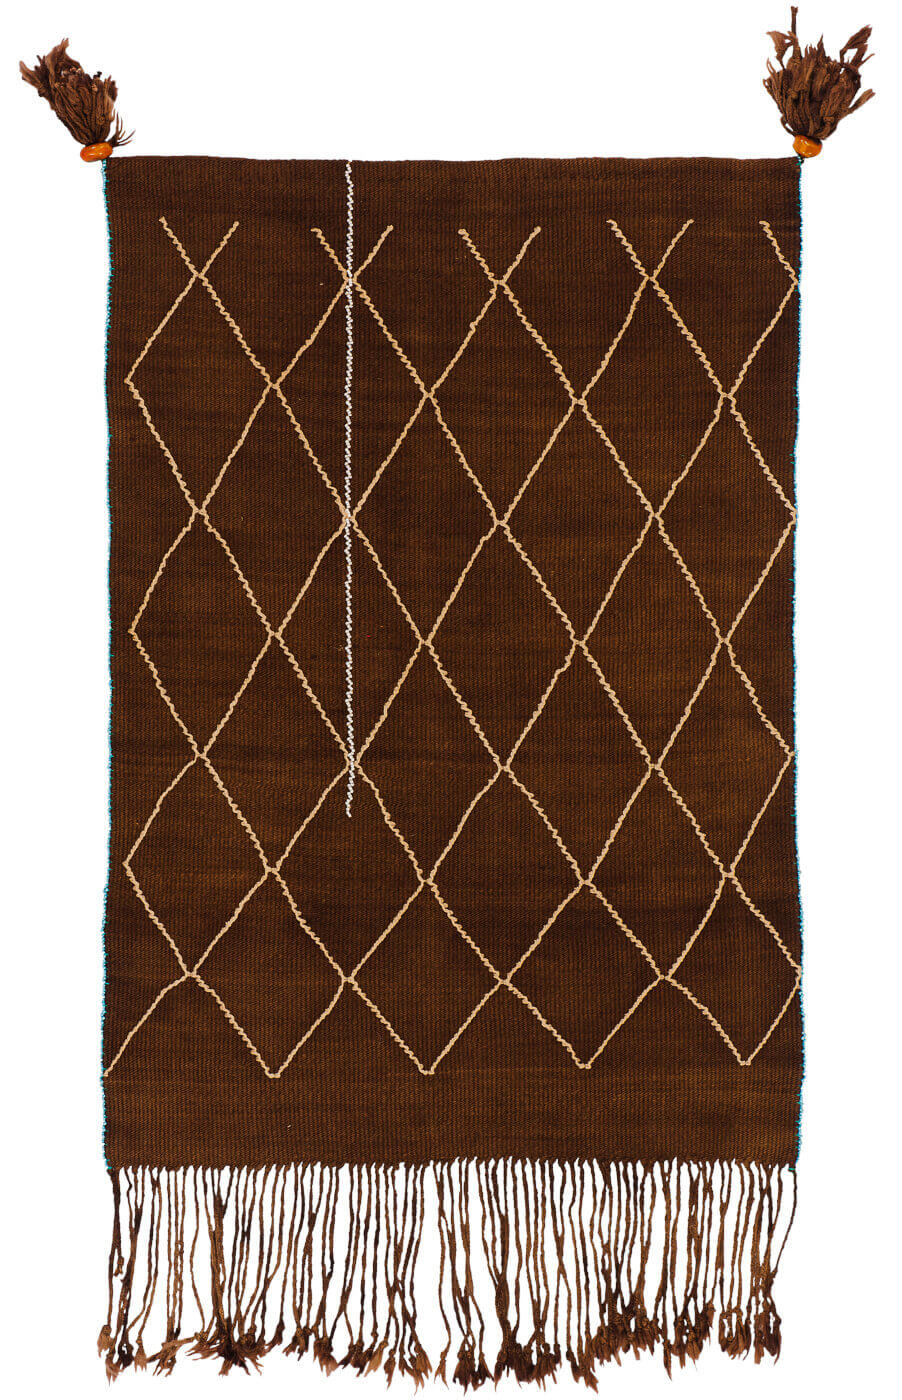 Tribal Design Wool Hand-knotted Rug